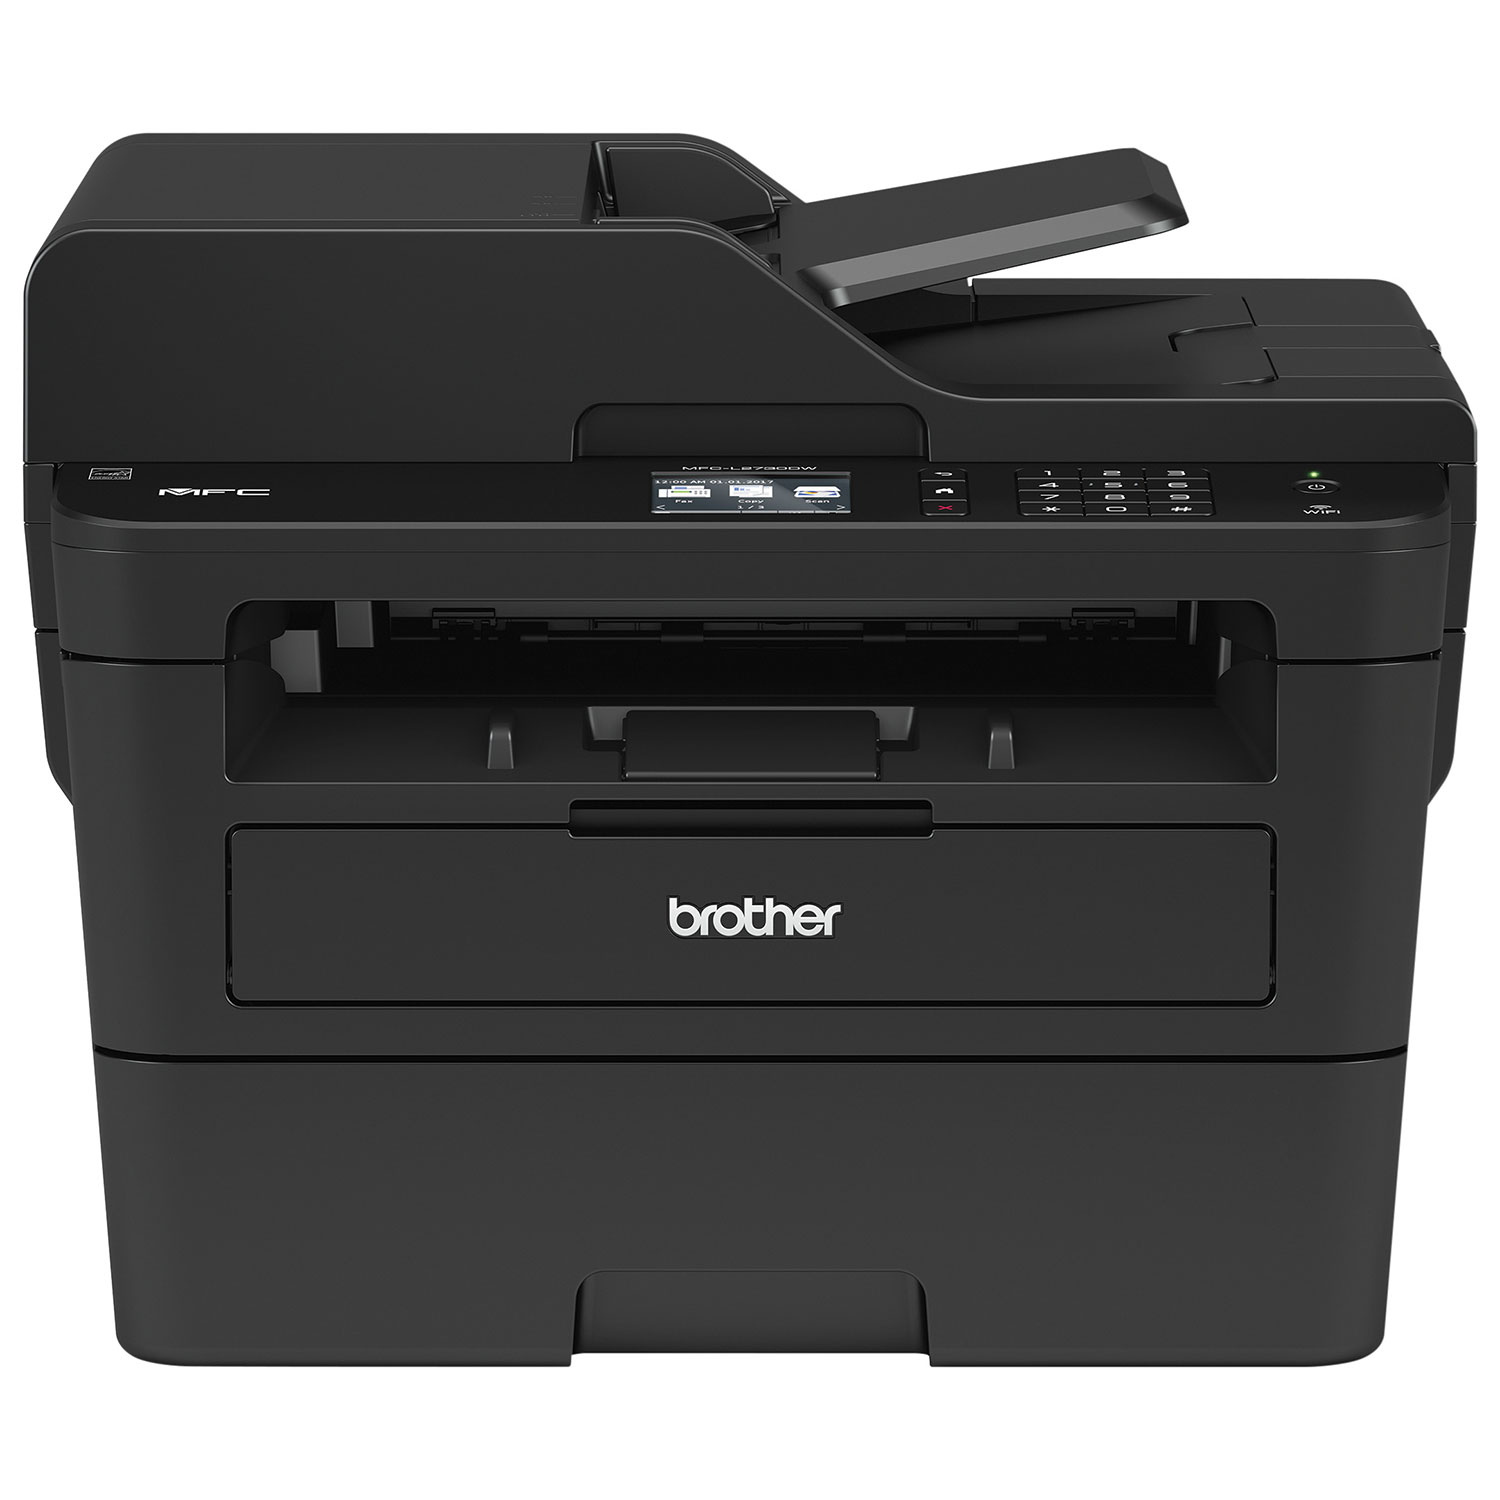 Brother Monochrome Wireless All-in-One Laser Printer (MFCL2730DW)